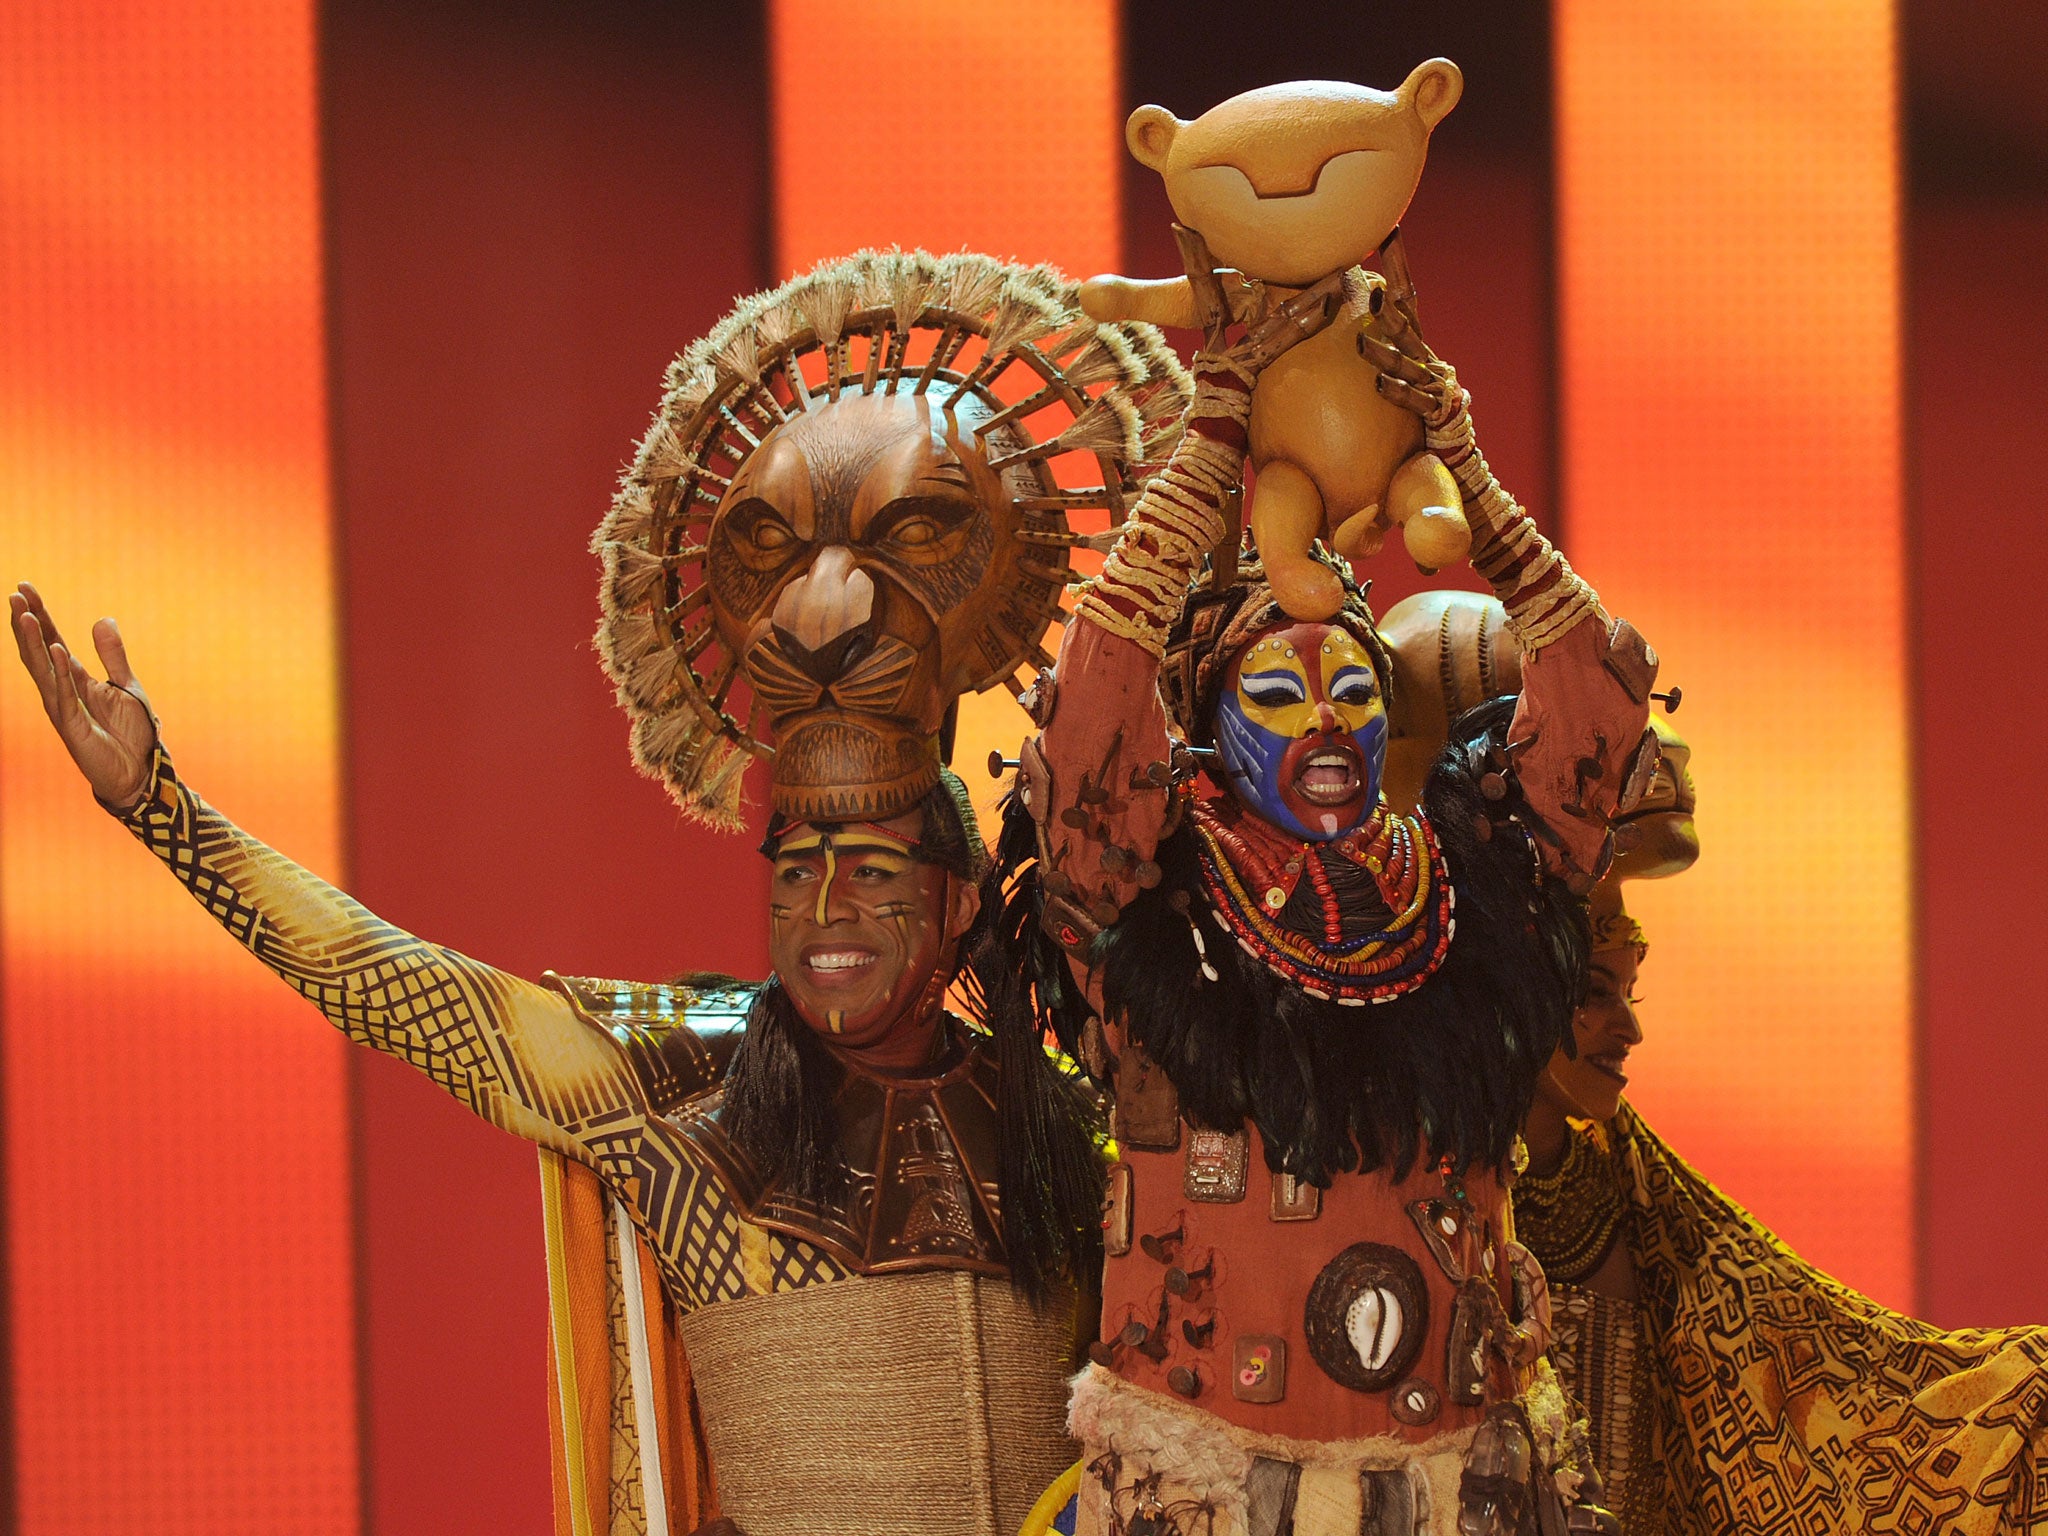 Penetratie Uitbarsten Ademen The theatrical version of The Lion King has become the most lucrative  entertainment event in history, but who is profiting? | The Independent |  The Independent